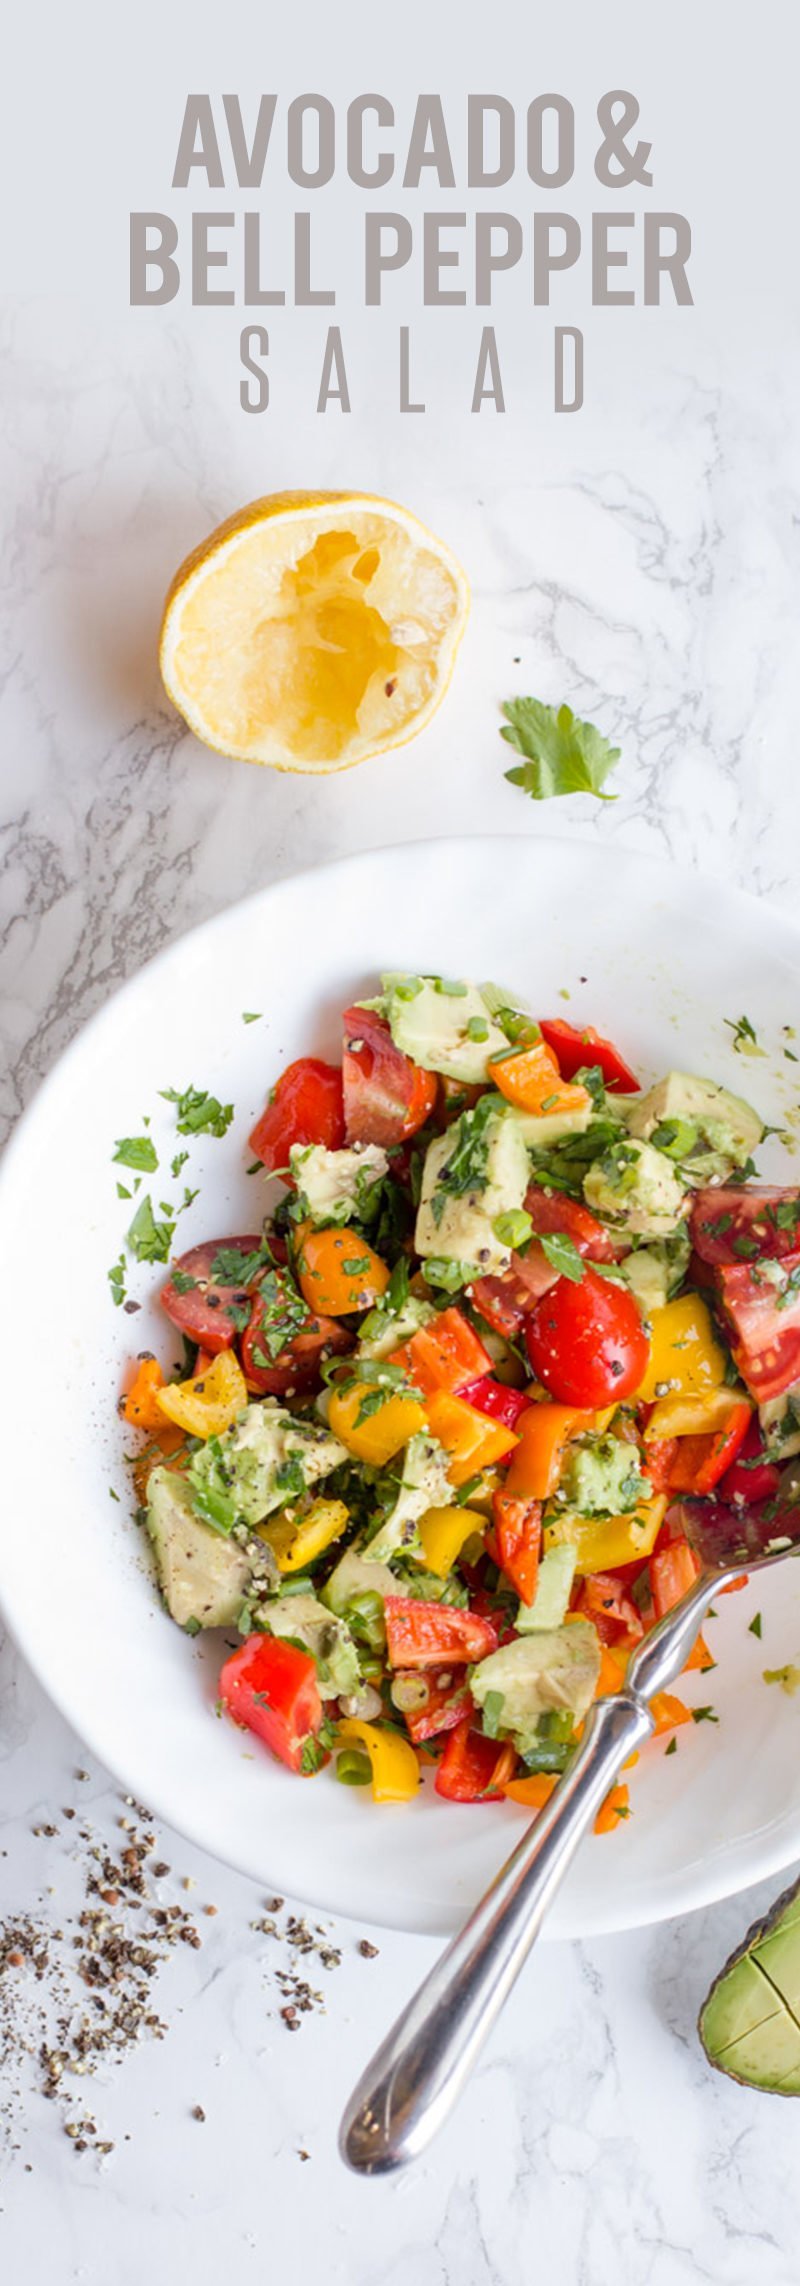 Avocado Bell Pepper Salad | Wholefully